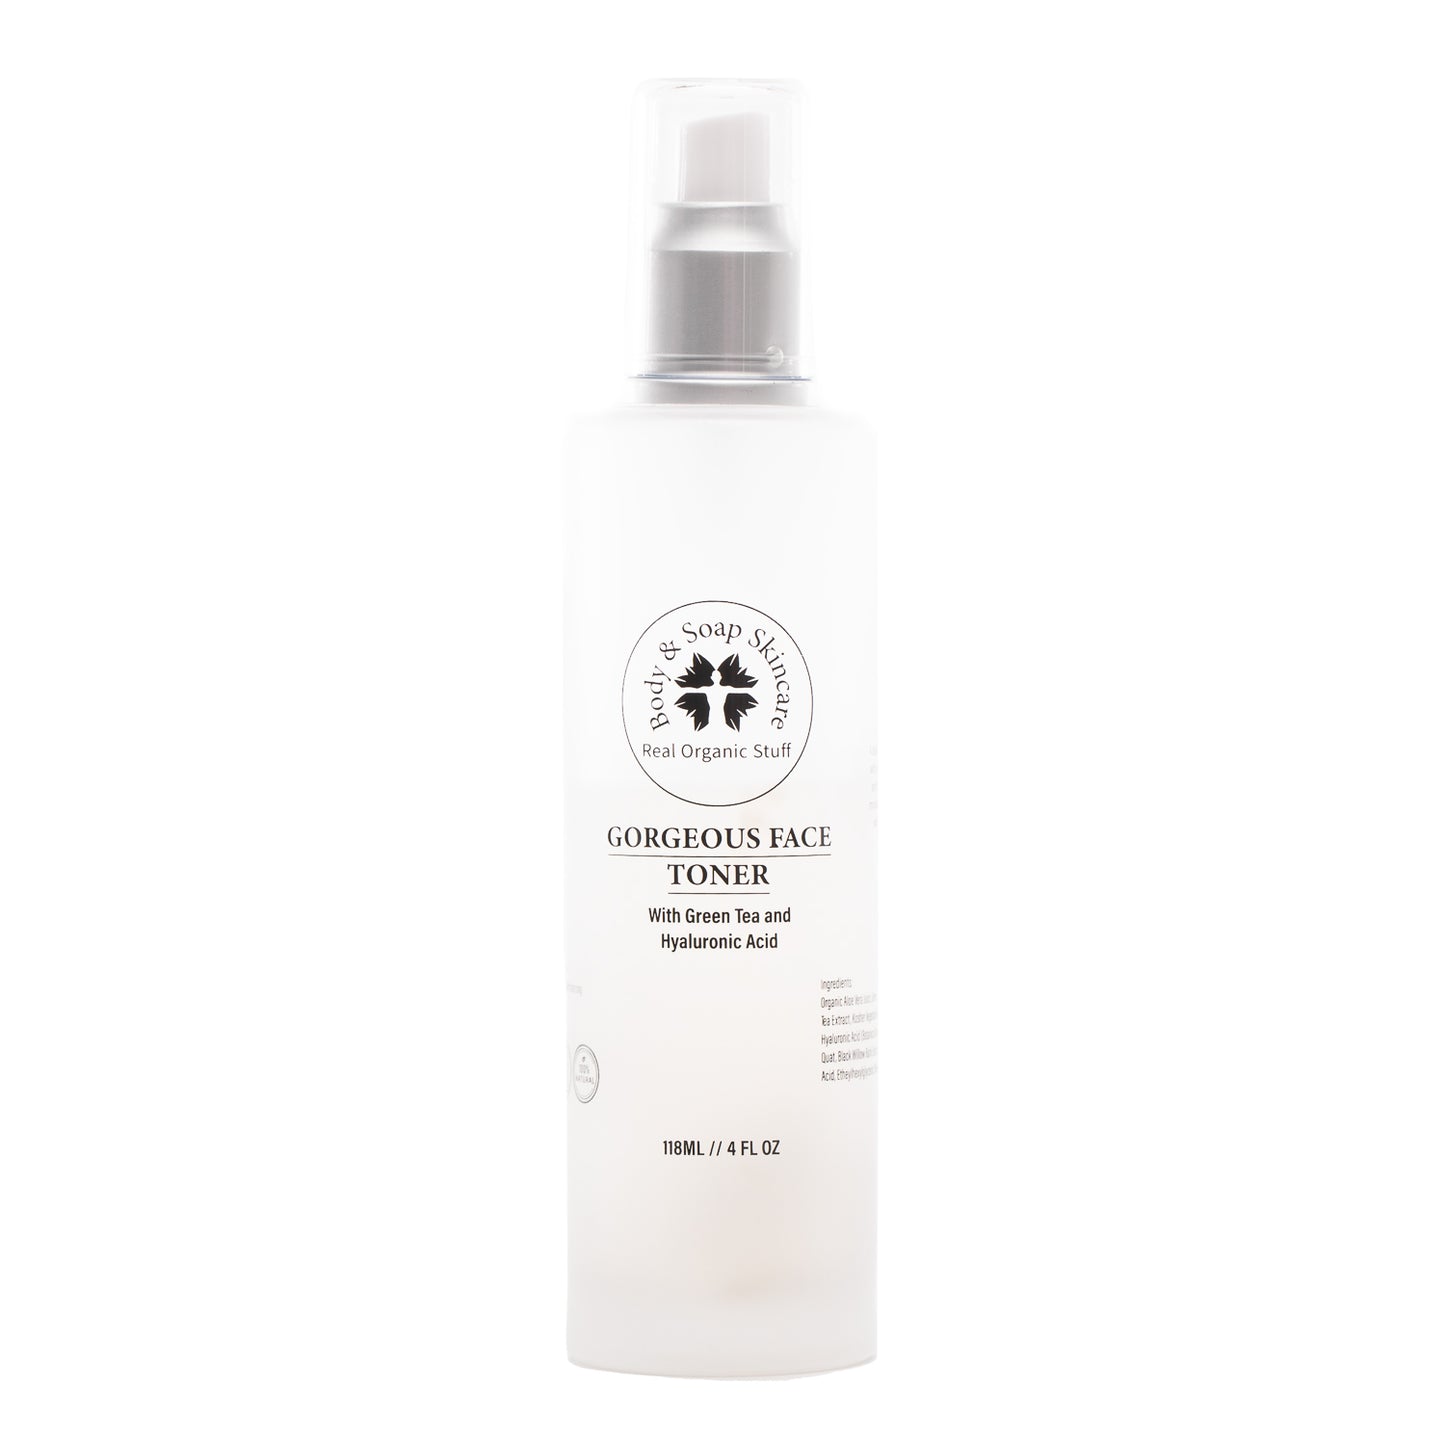 Gorgeous Face Facial Toner With Hyaluronic Acid And Green Tea - Body & Soap Skincare